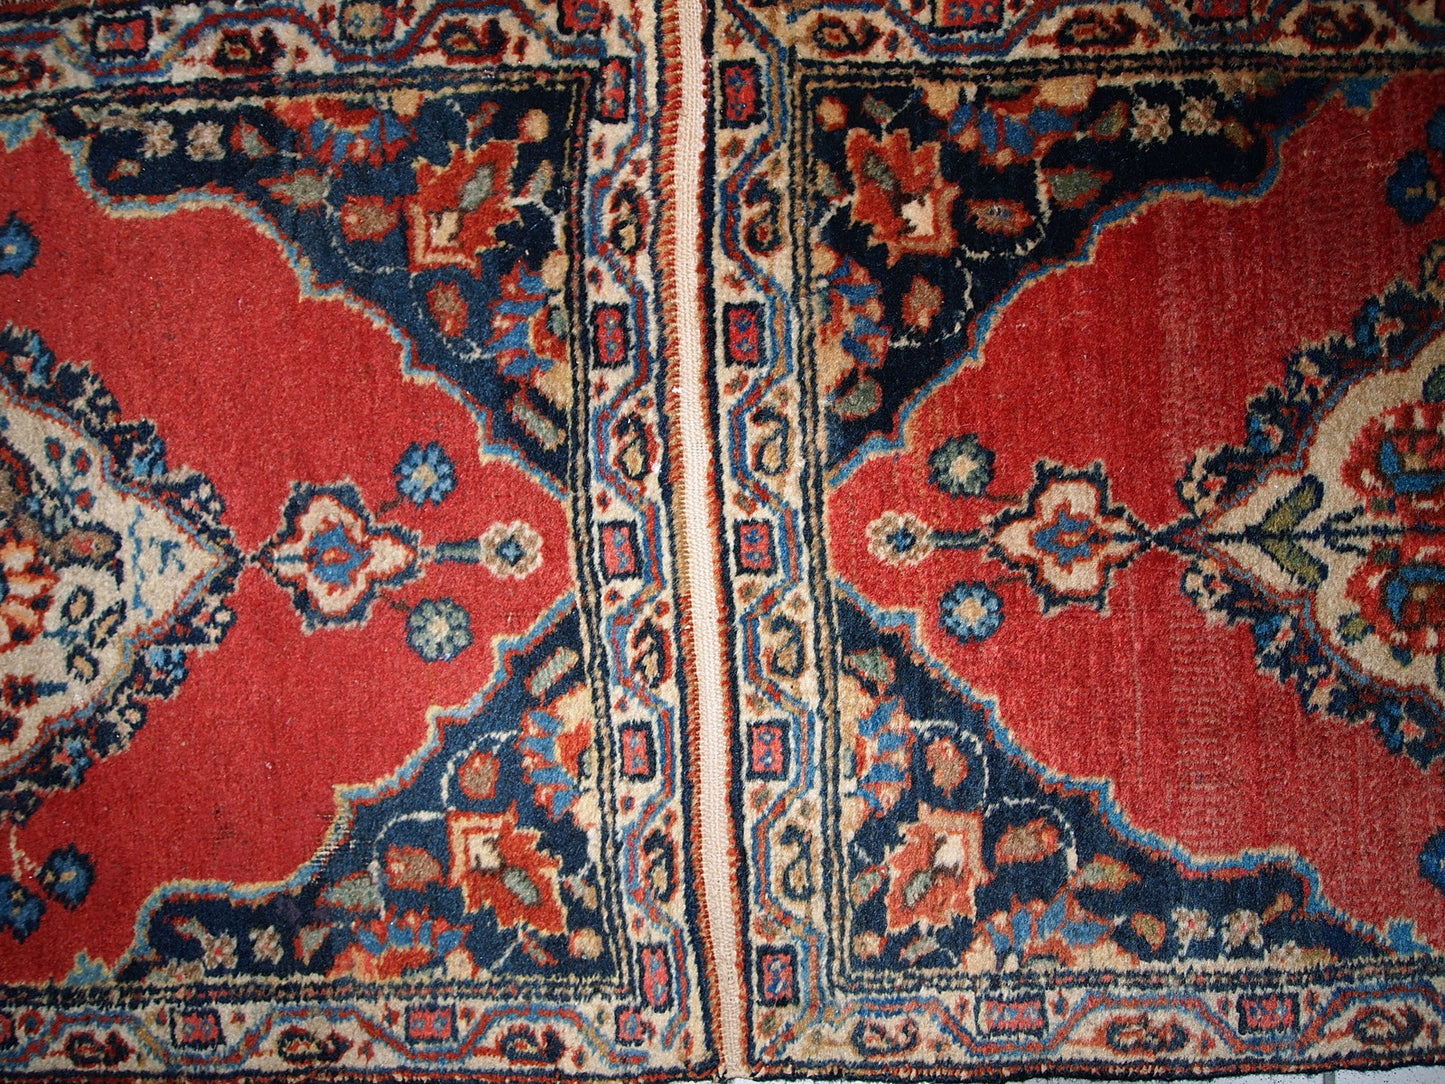 Antique Tabriz double mat in original good condition, one of the rugs has some low pile. The design is traditional with decorative birds in the center. 